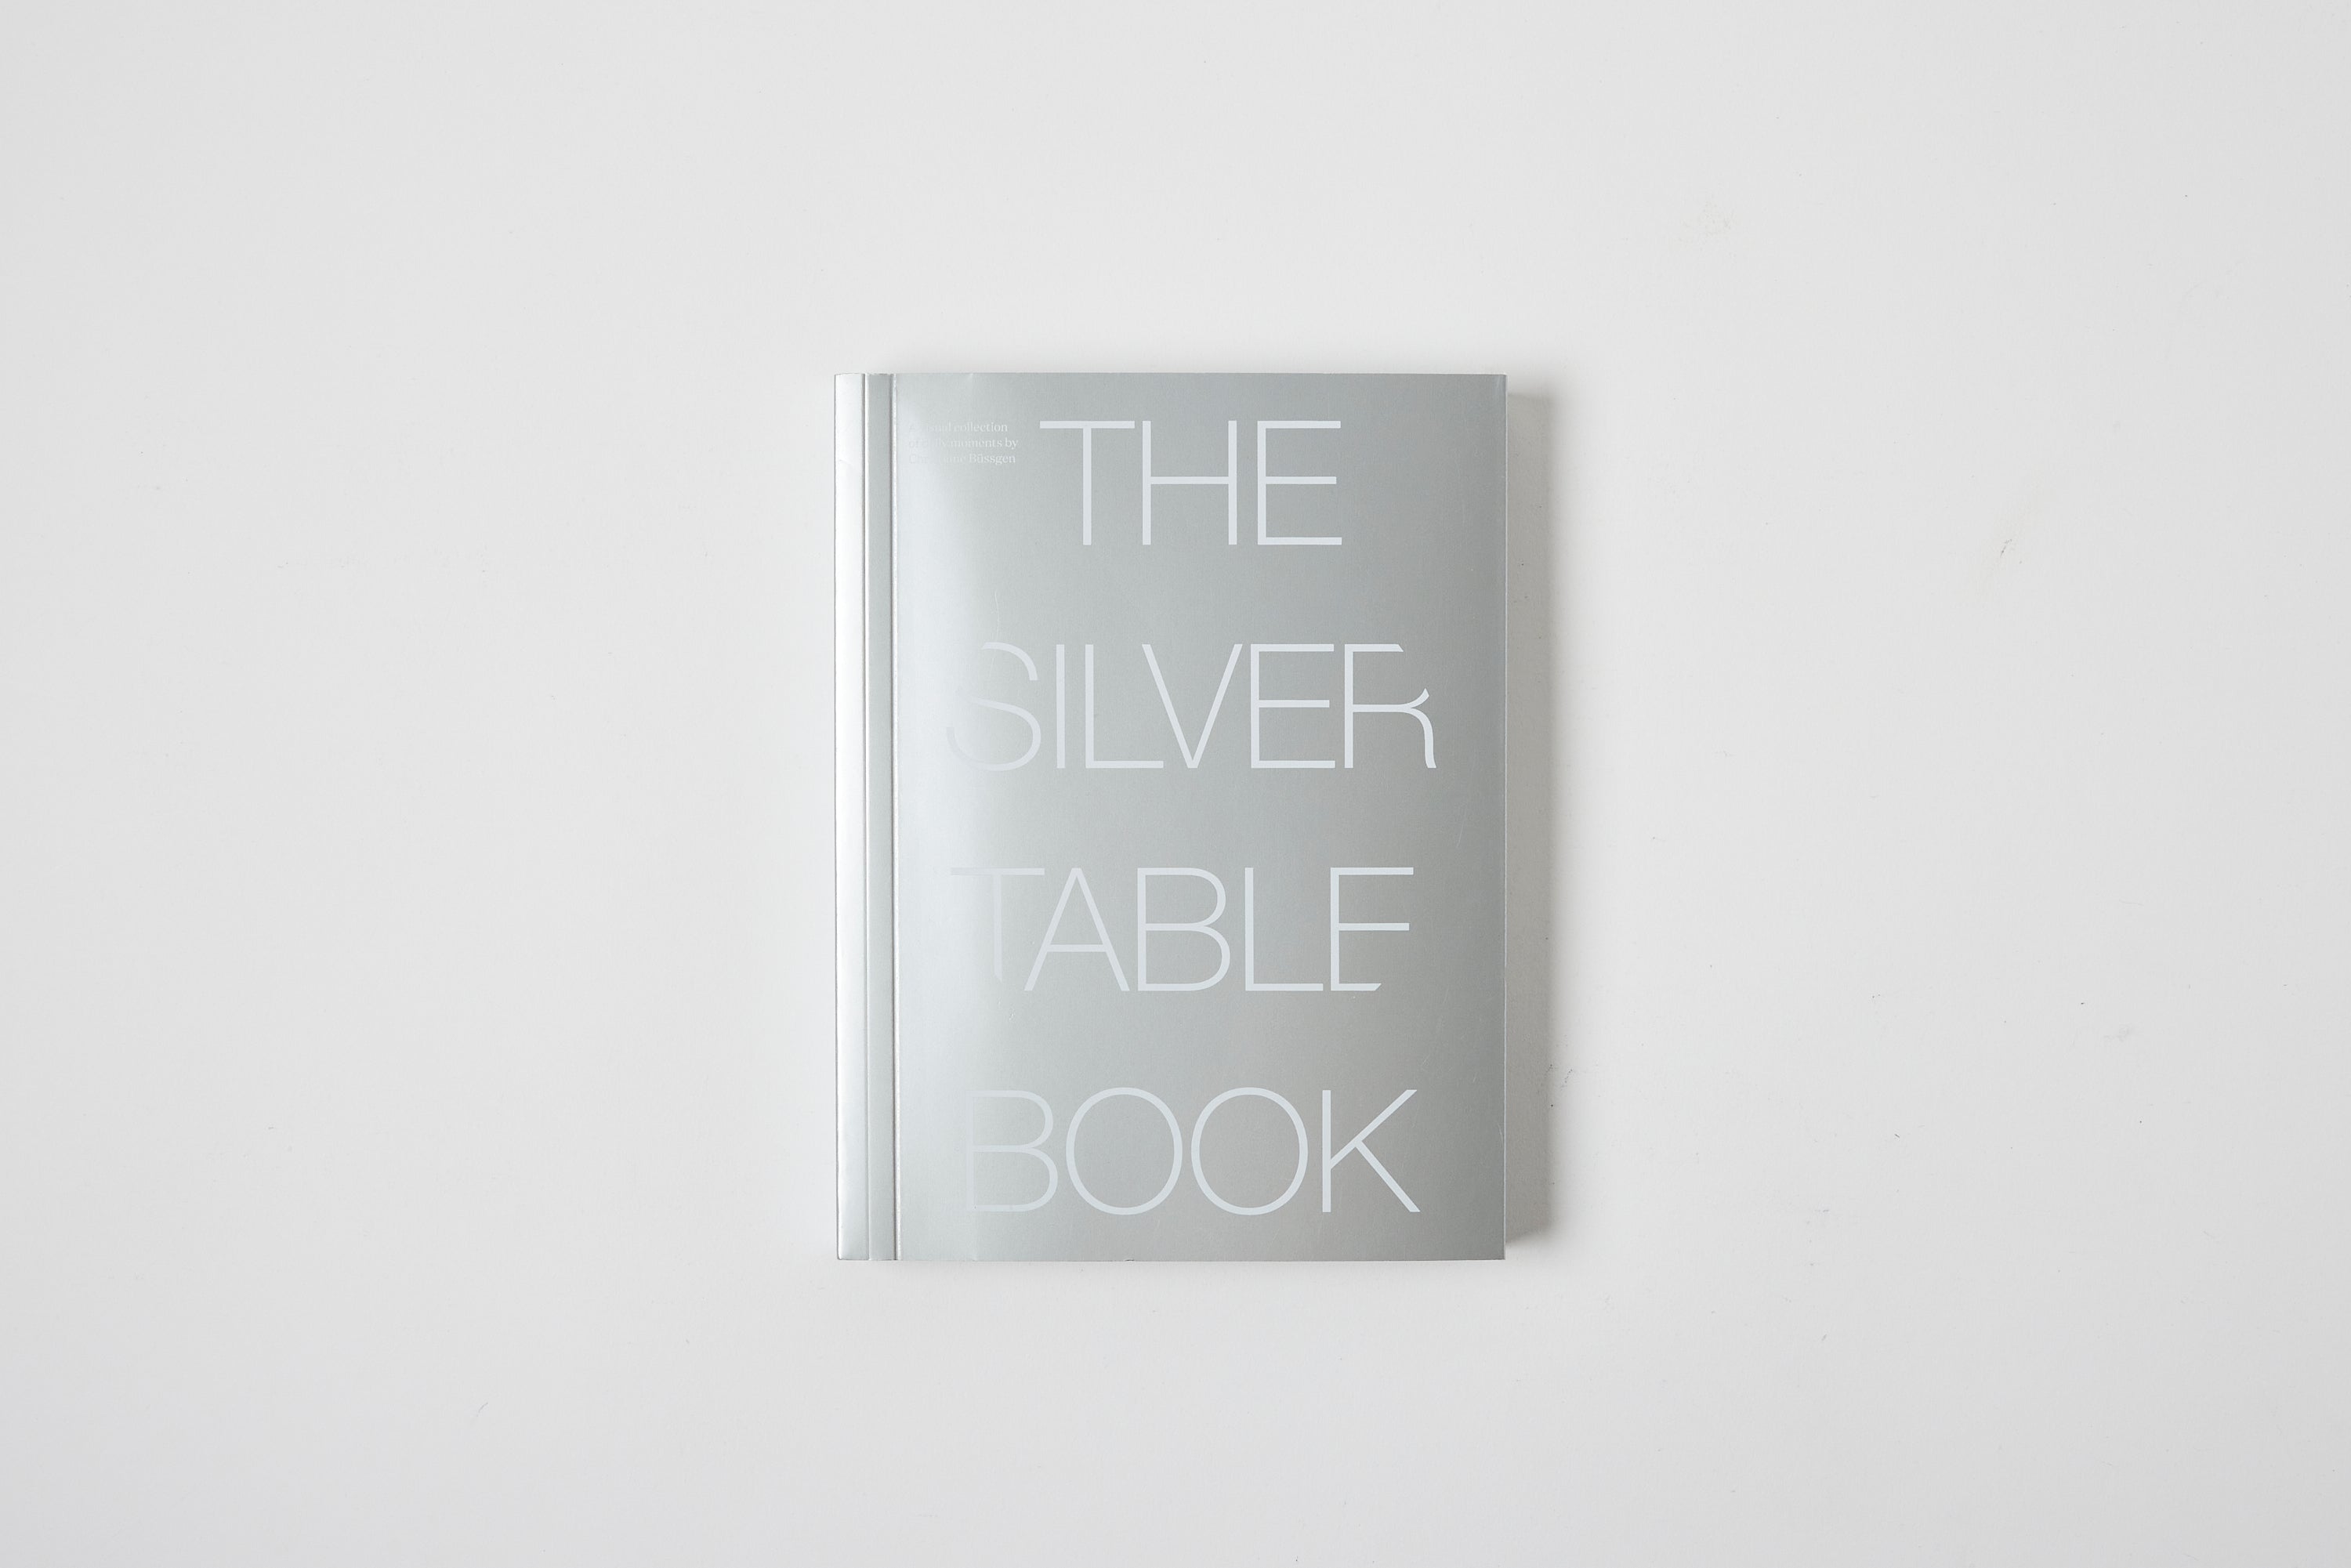 The Silver Table Book